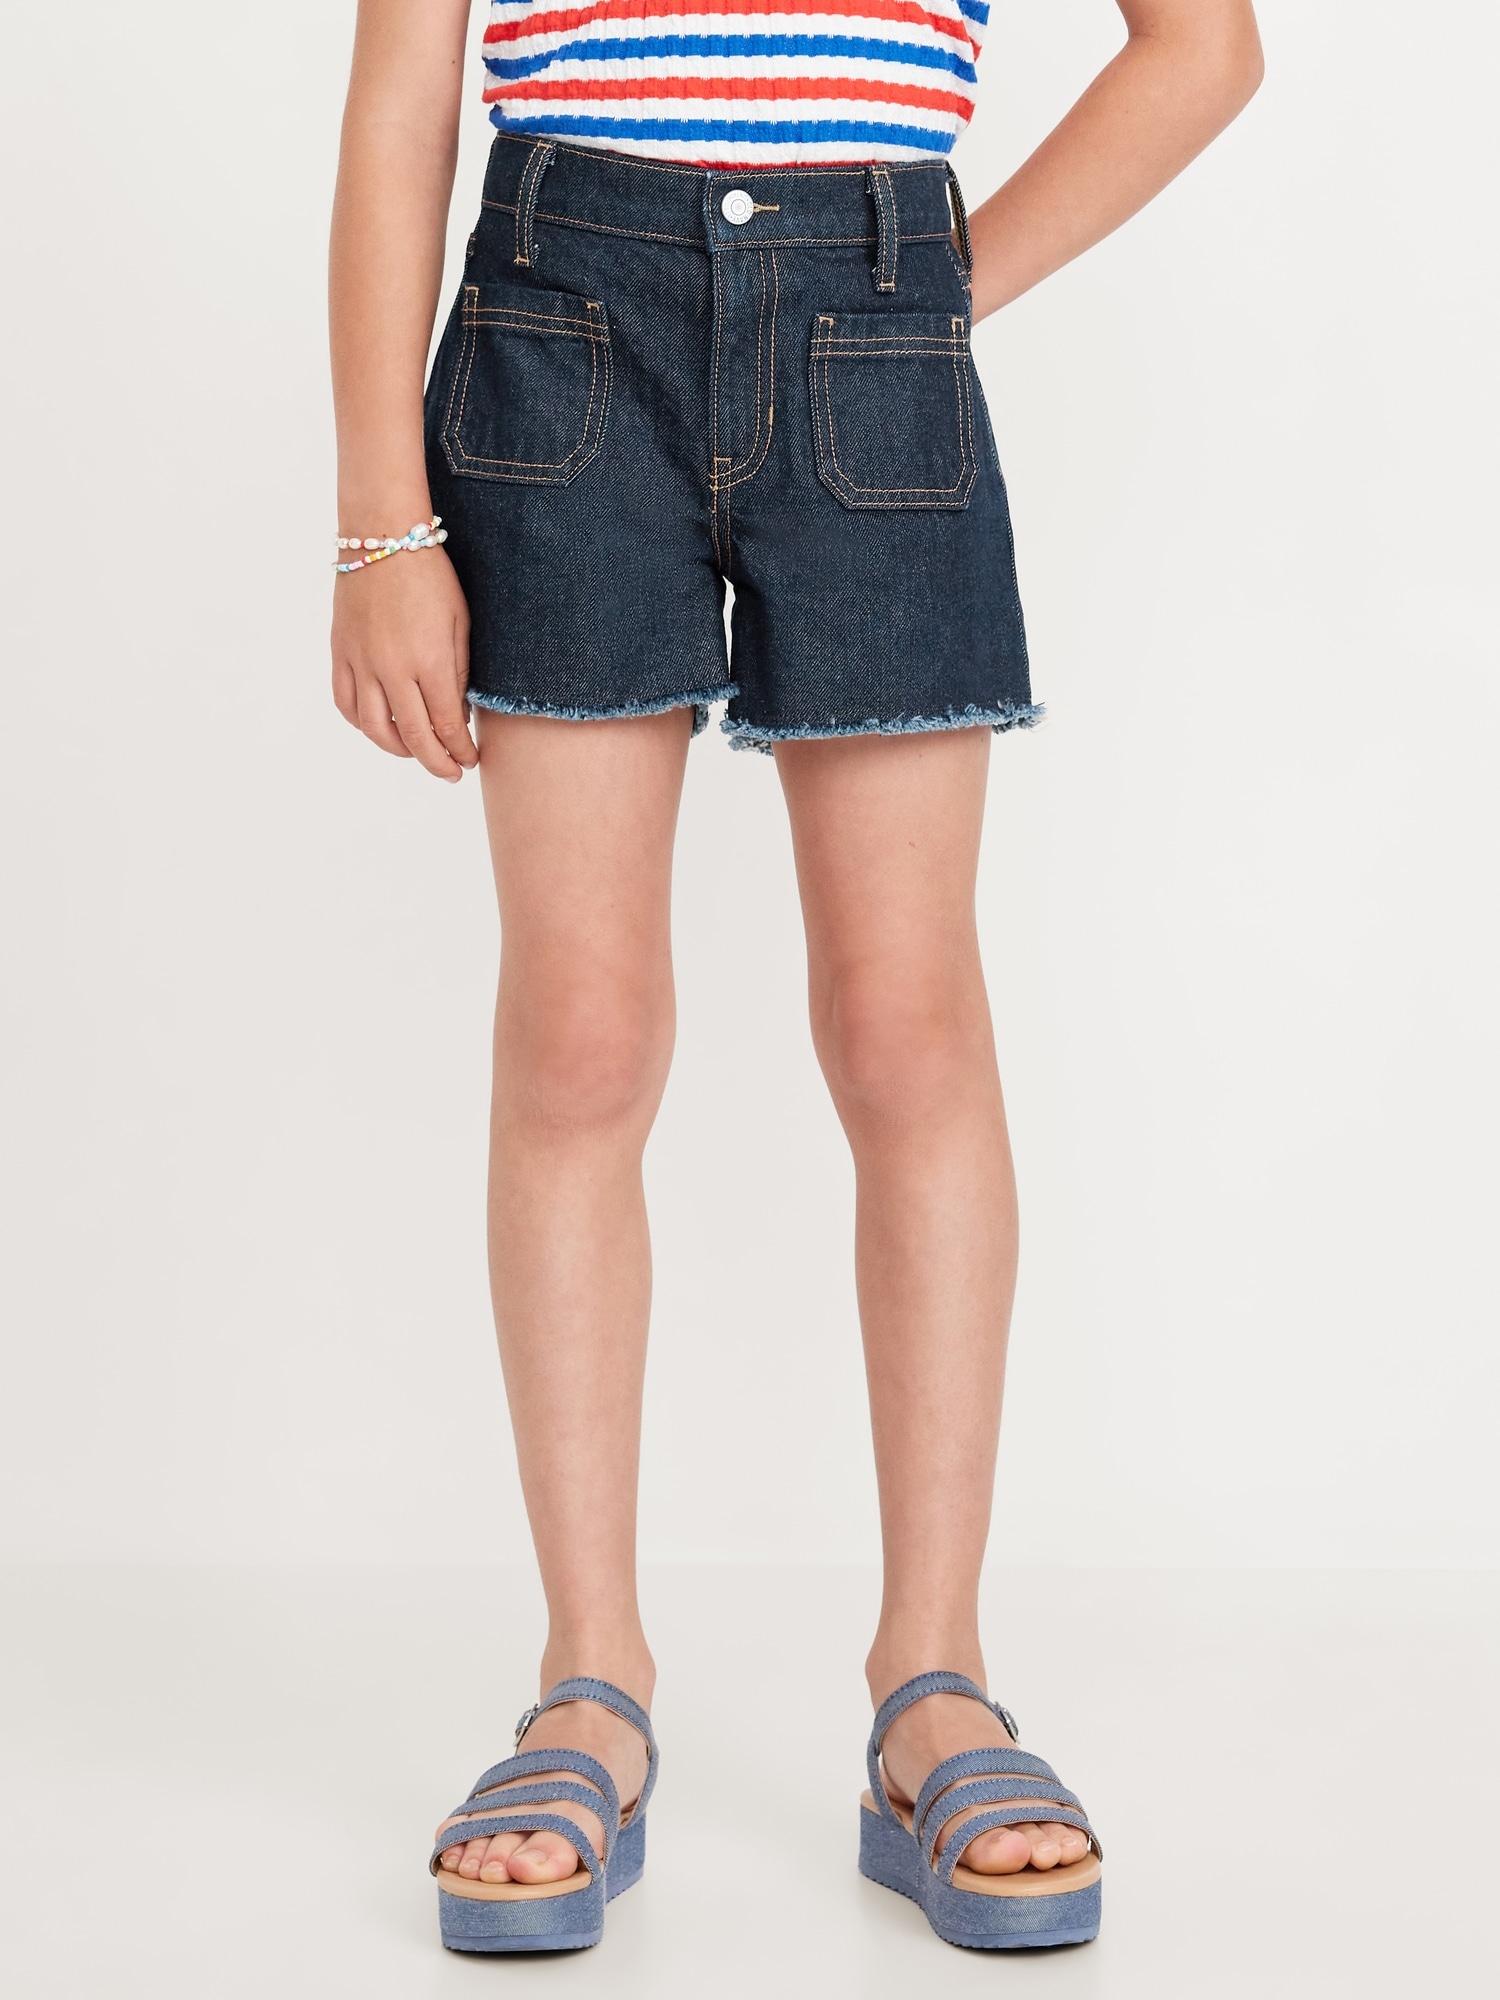 High-Waisted Pocket Jean Shorts for Girls